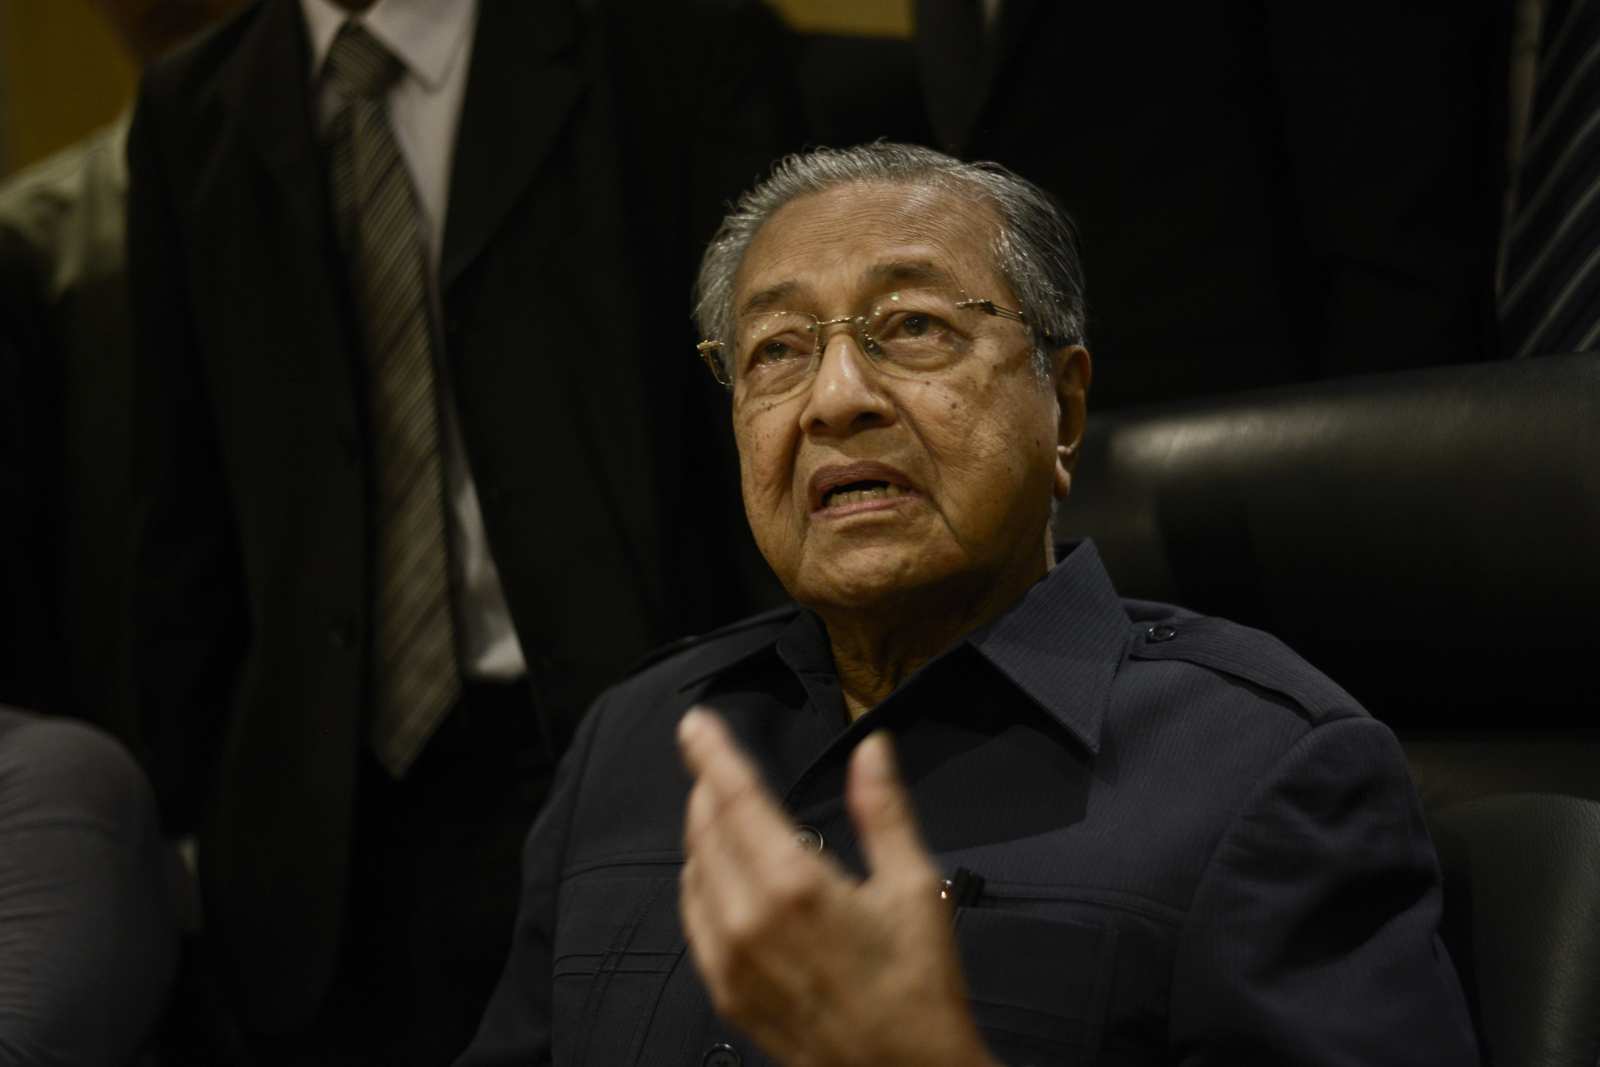 In a bid to remove the prime minister, Tun Dr Mahathir Mohamad has approached his political foes to work together. – The Malaysian Insider file pic, March 2, 2016.